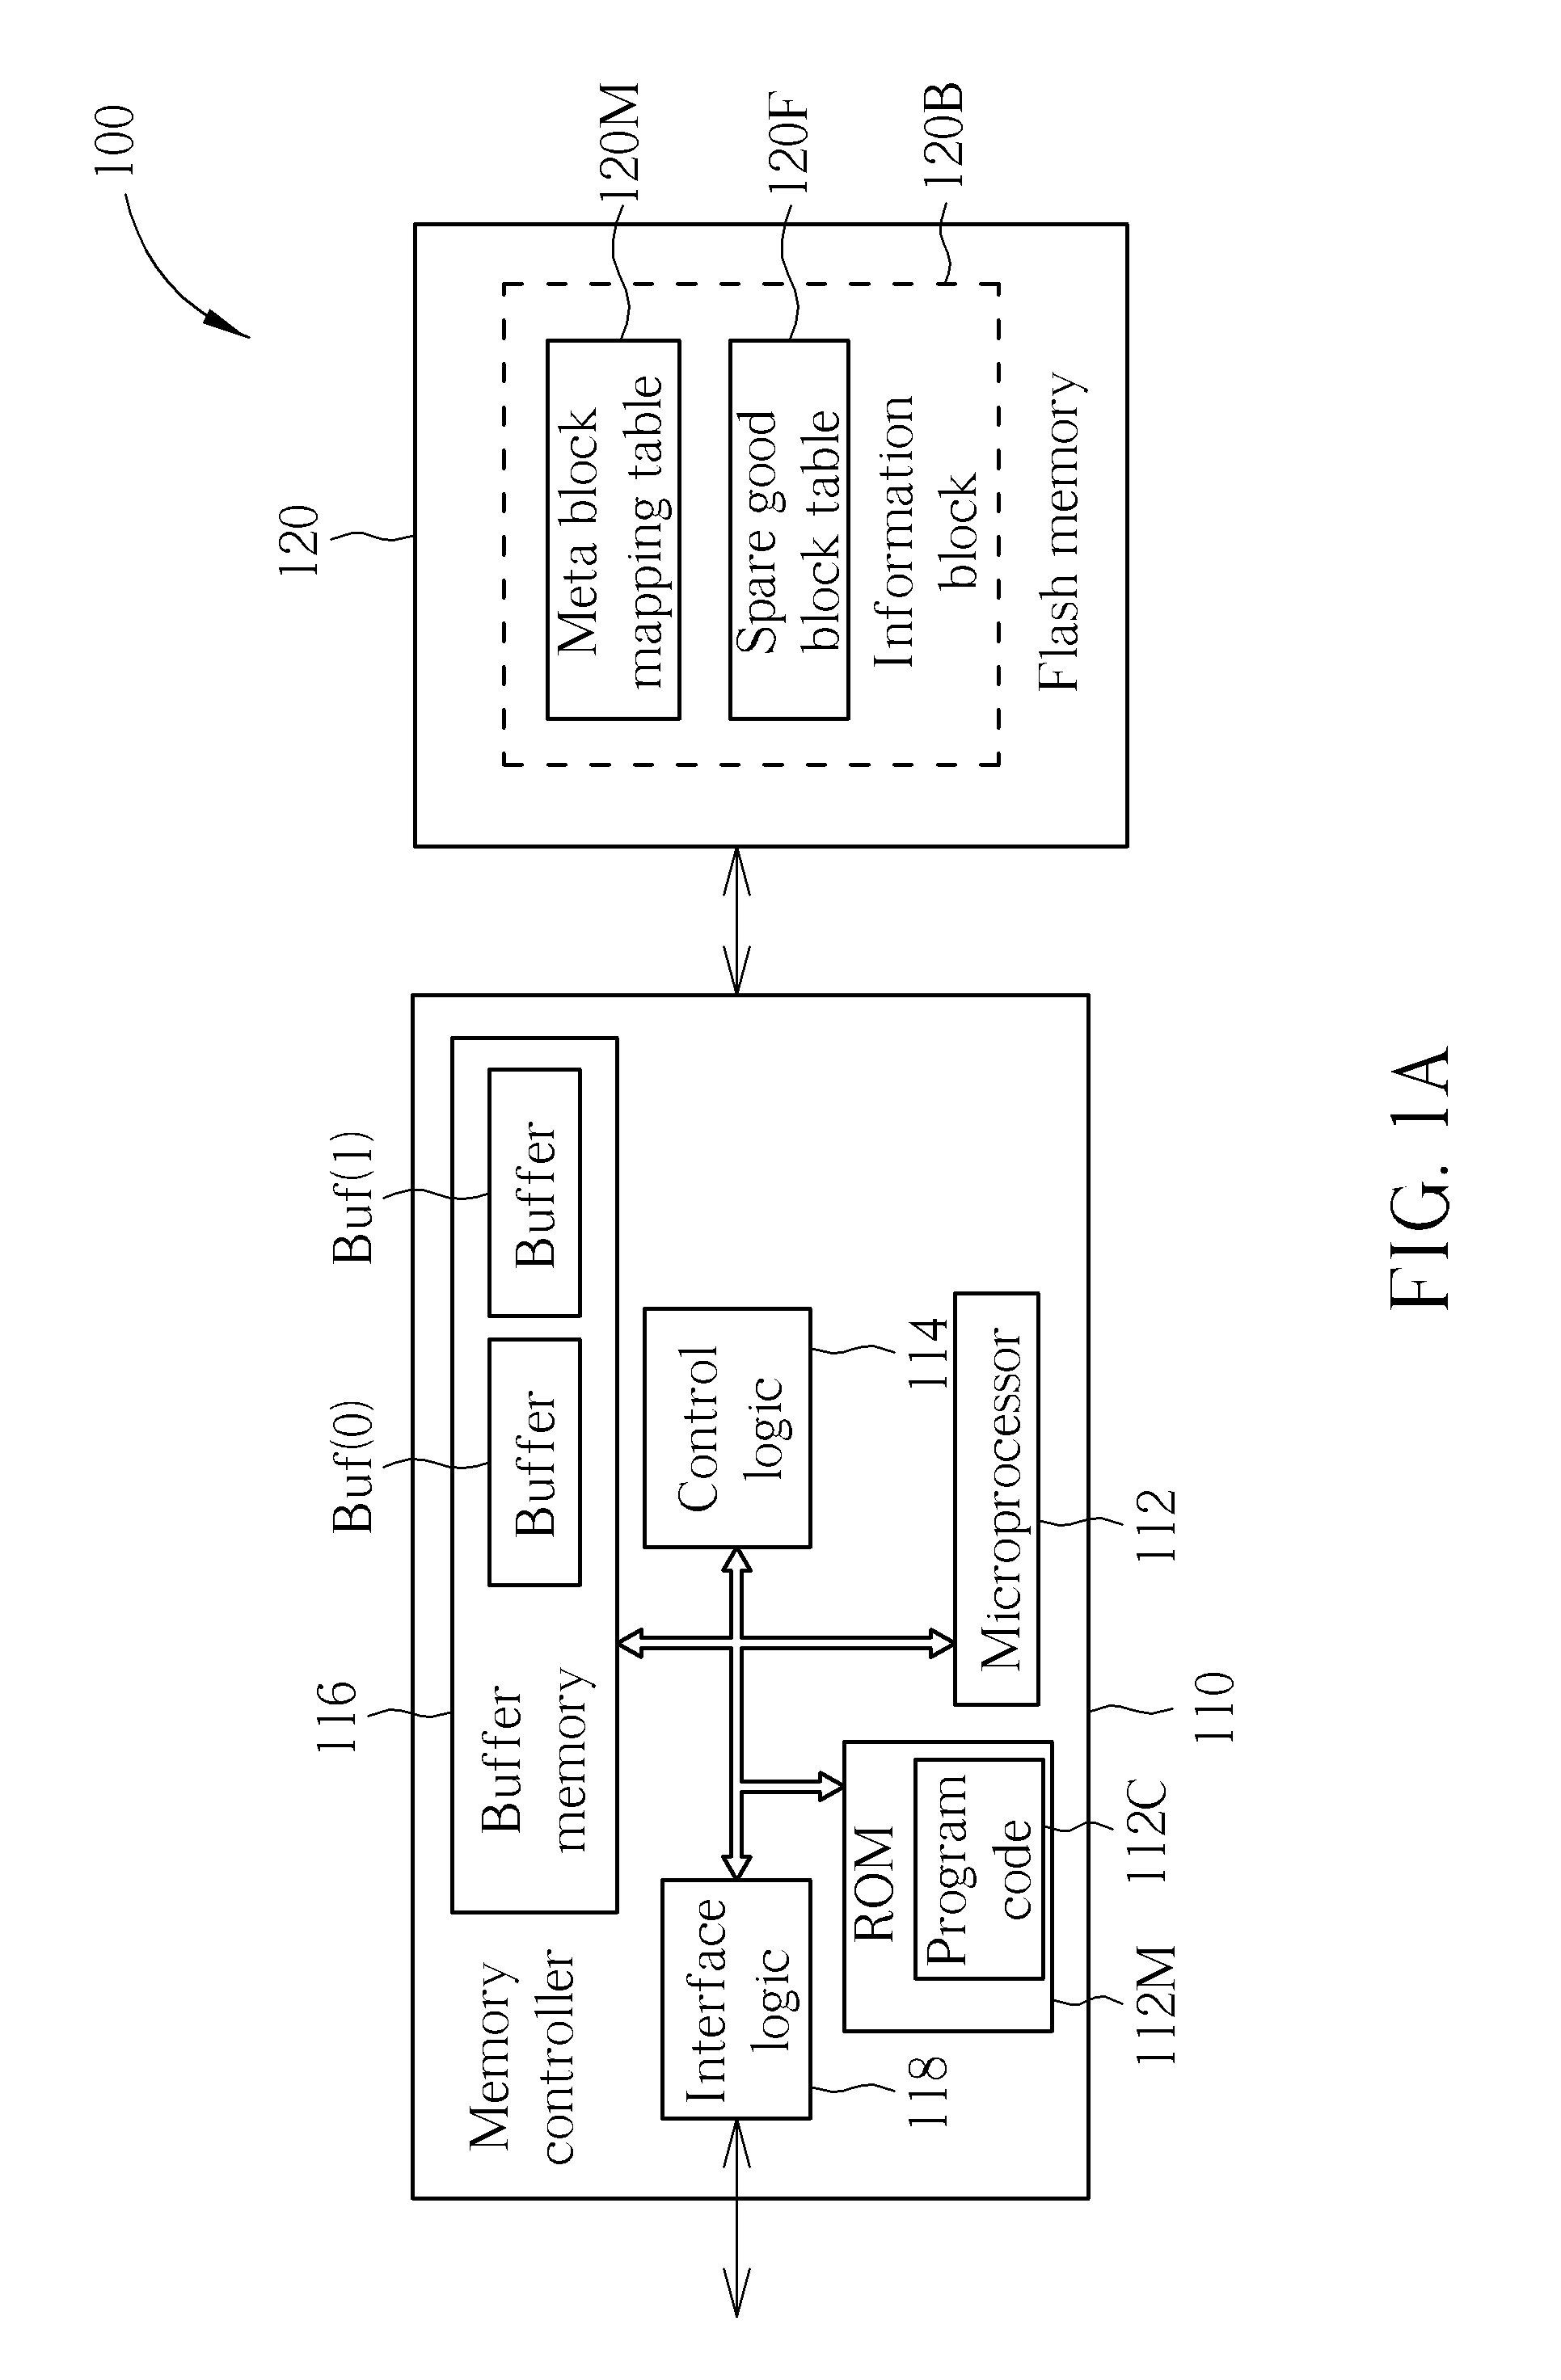 Method for performing block management, and associated memory device and controller thereof